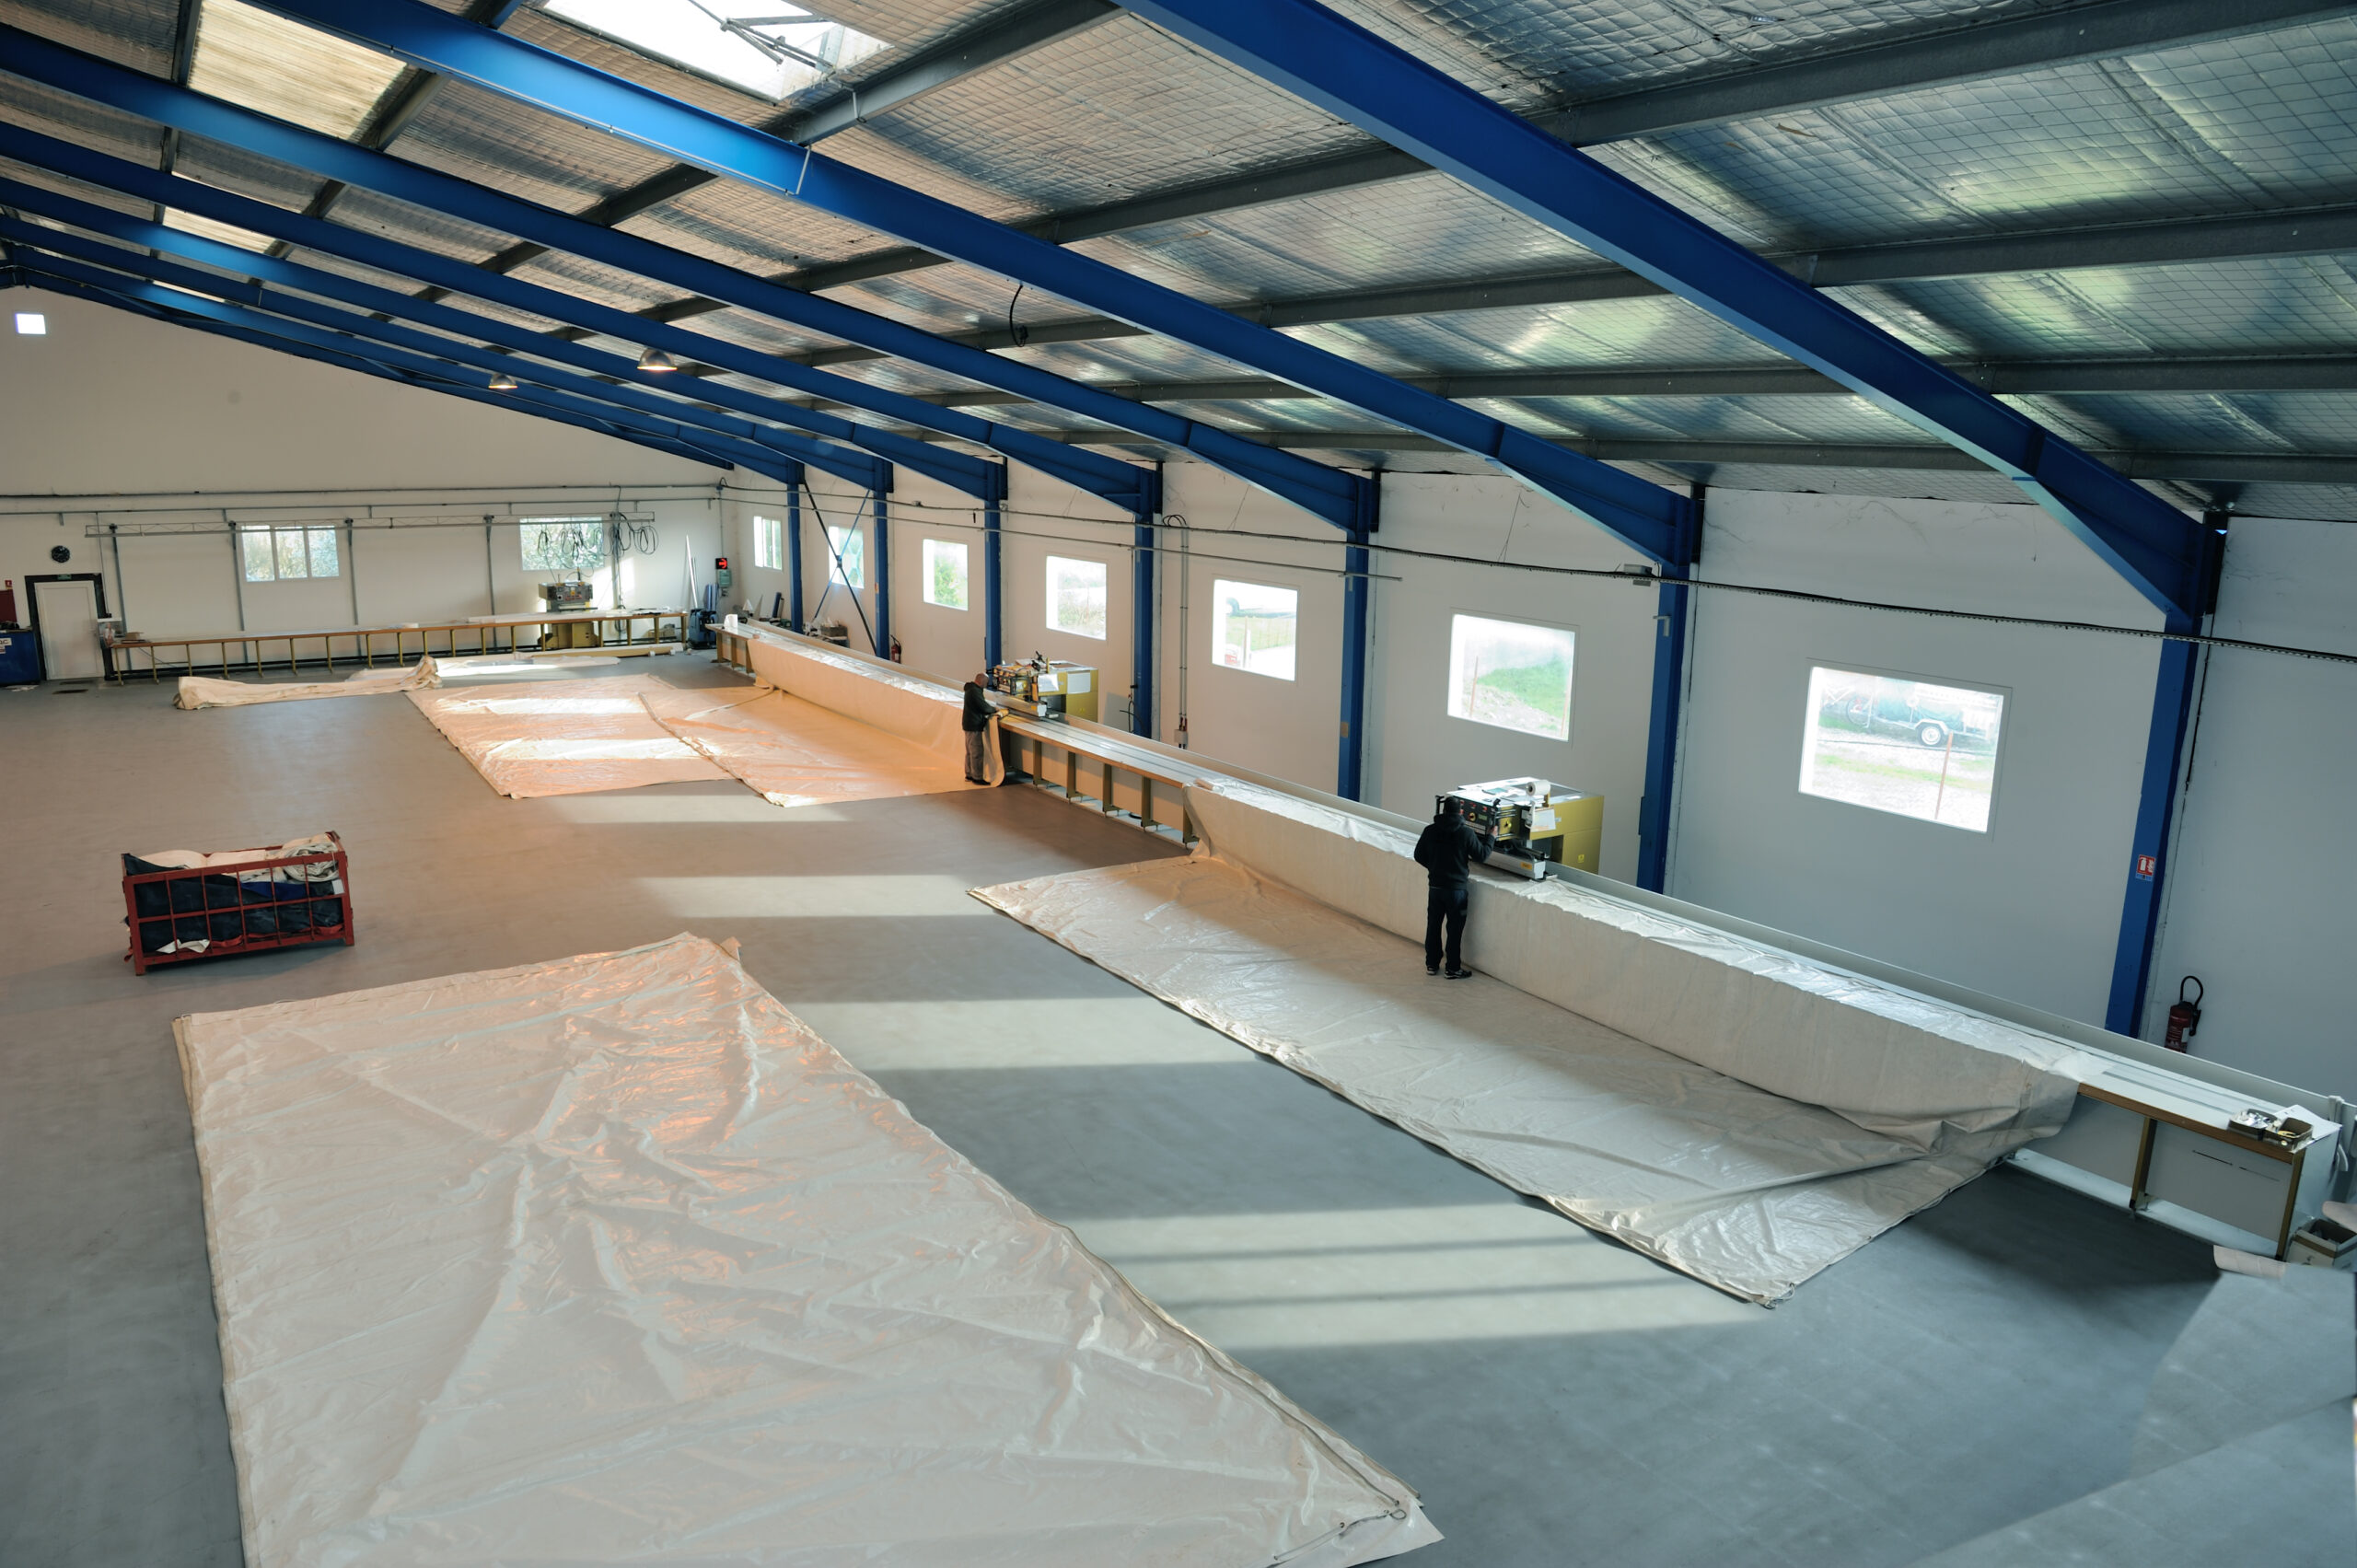 Lauralu temporary building manufacturers and open plan warehouse space